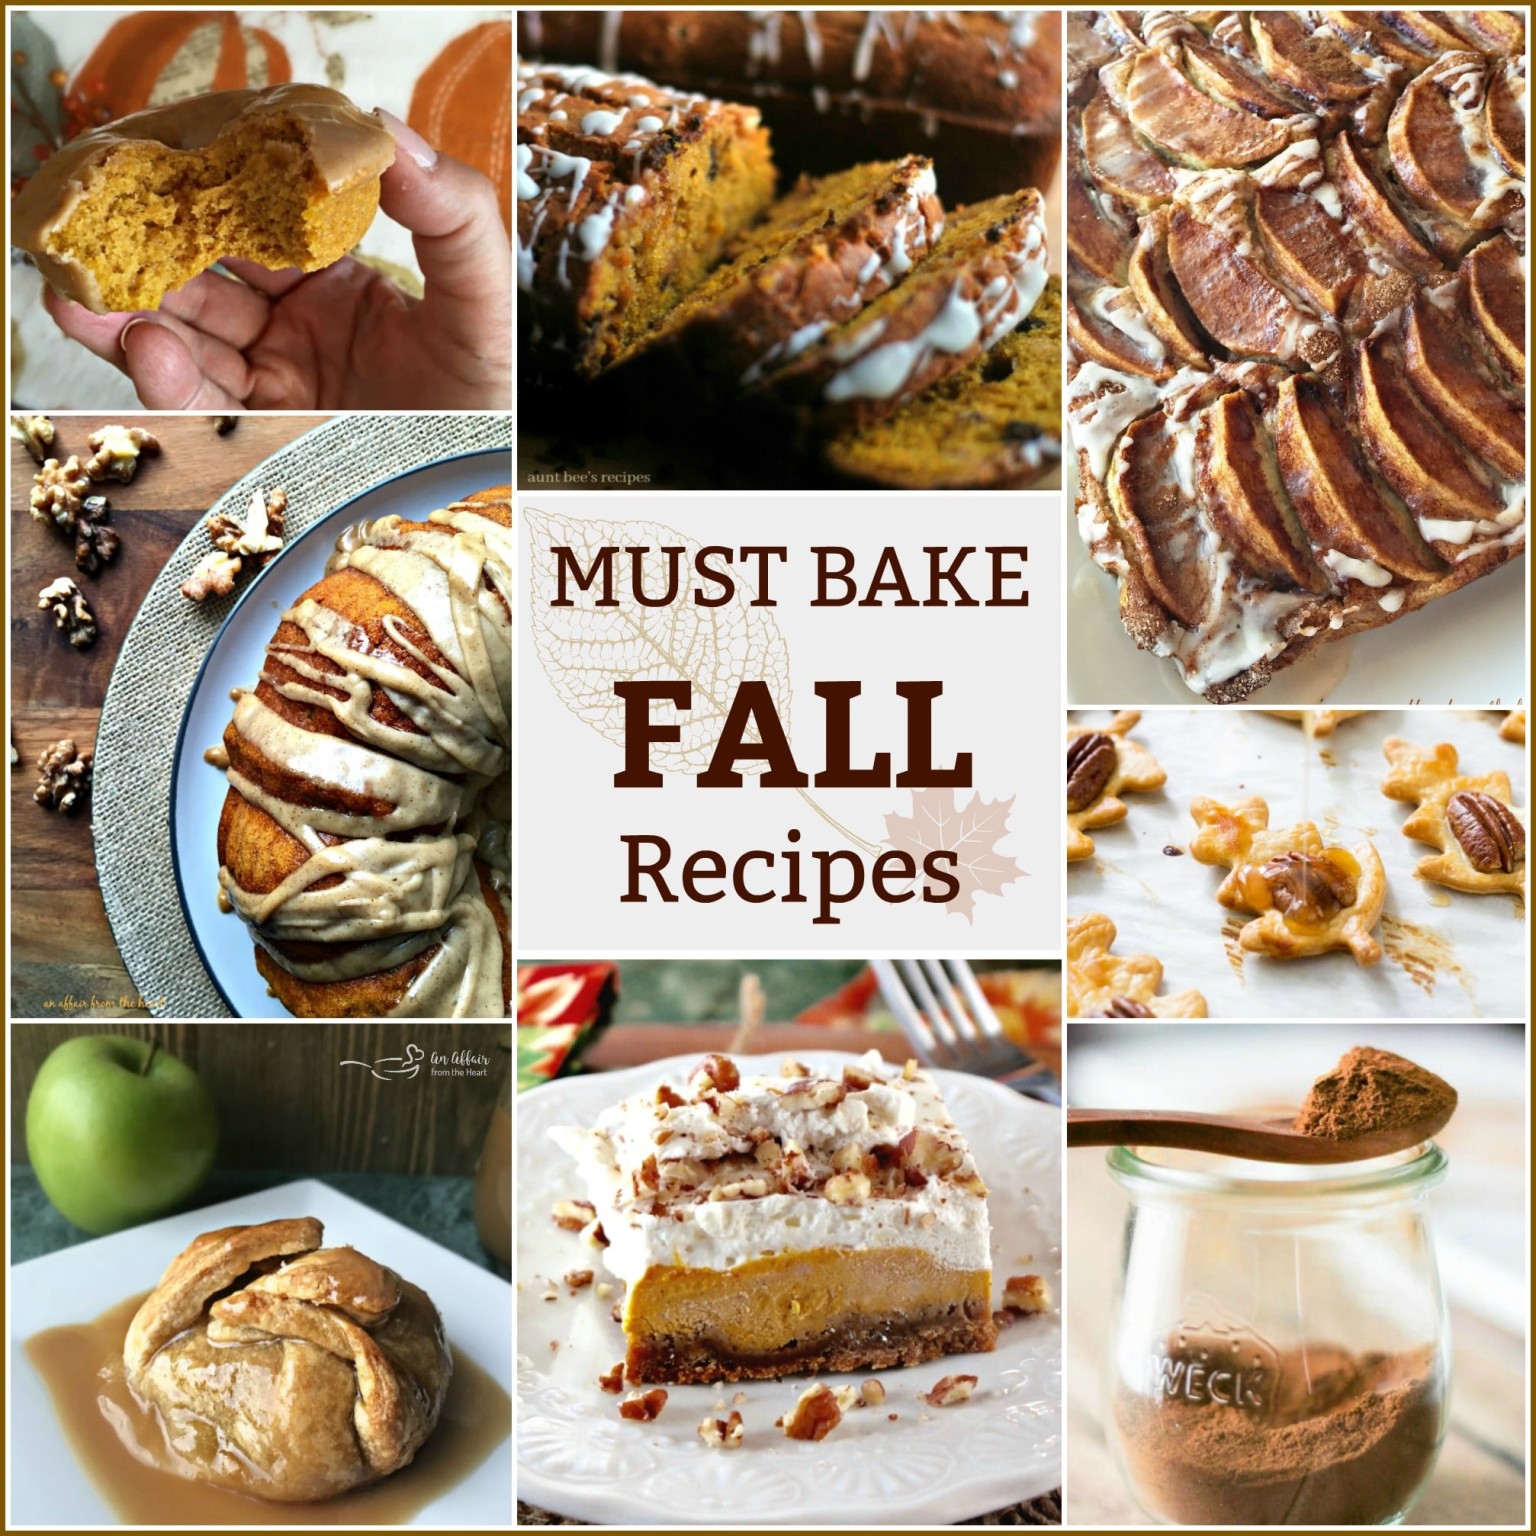 Must Bake Fall Recipes - Apple, Pumpkin, Pecan, Maple and Fall Spice